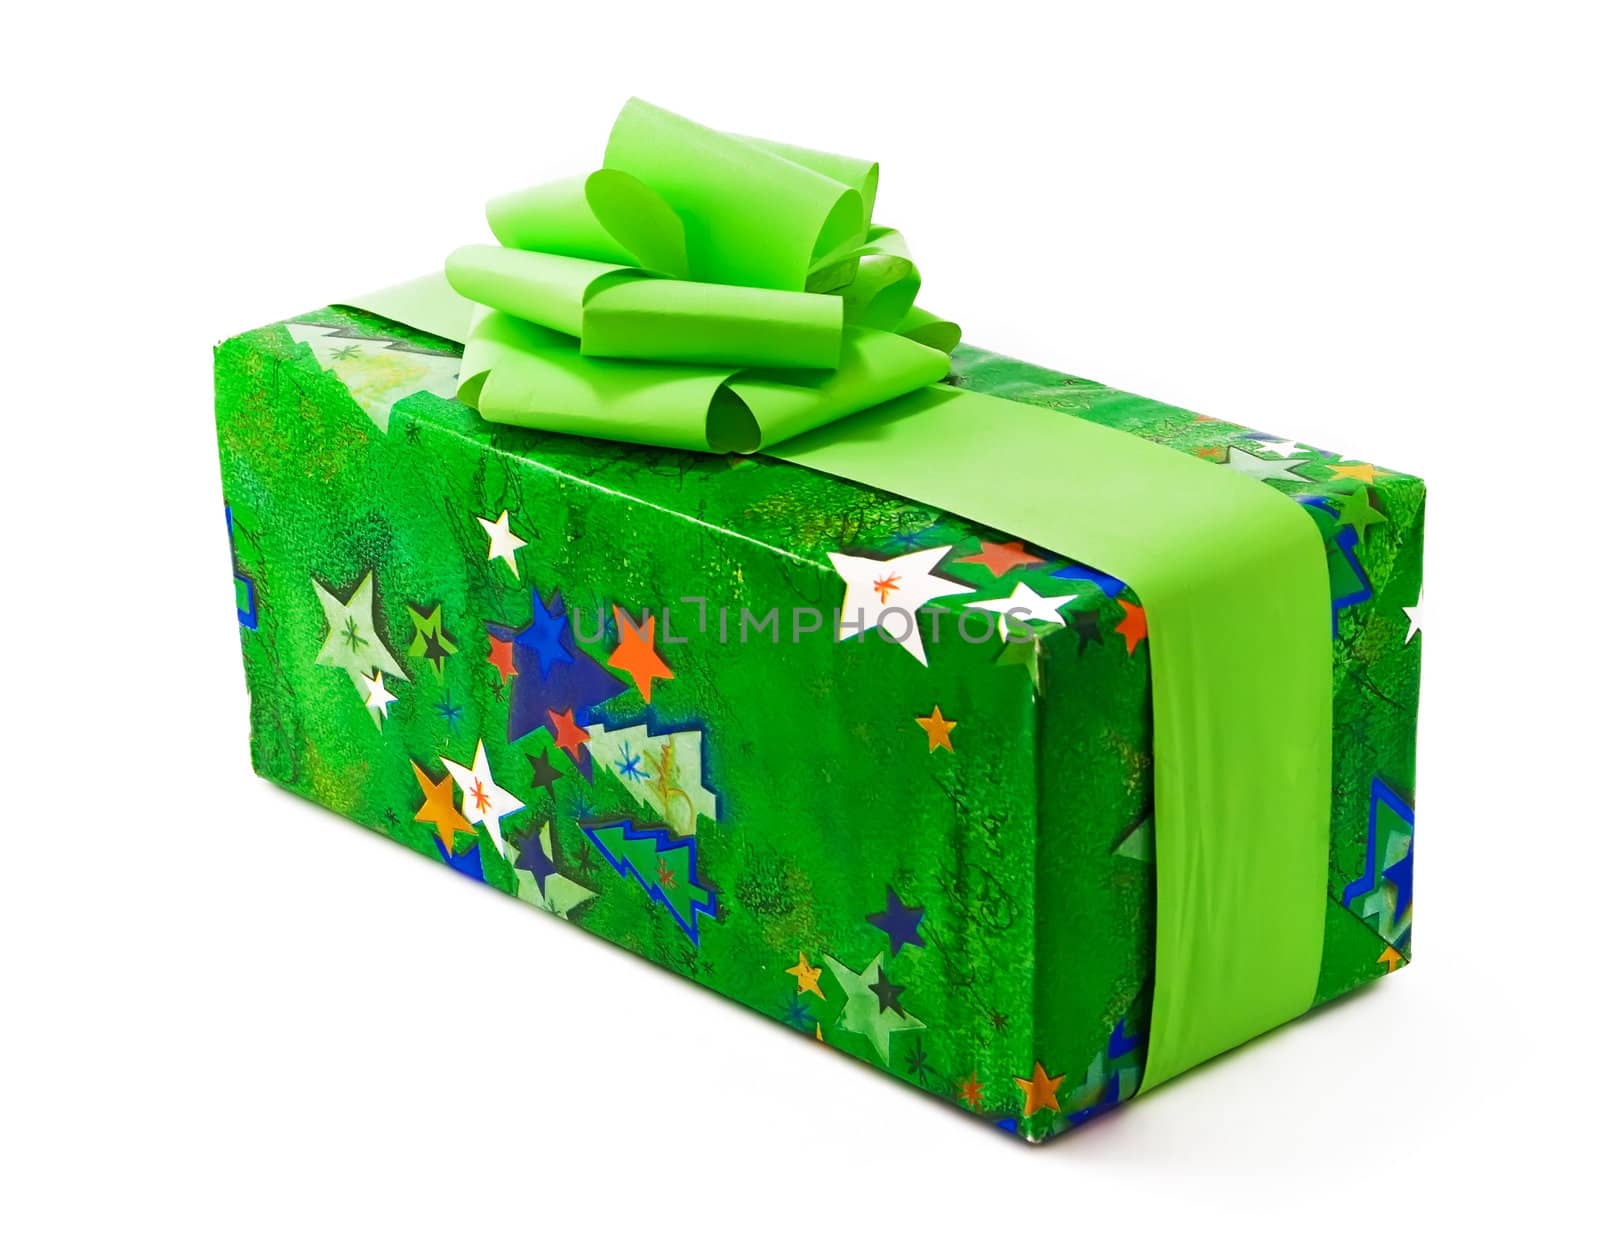 Chrismas gift wrapped in green paper with bows by lmeleca